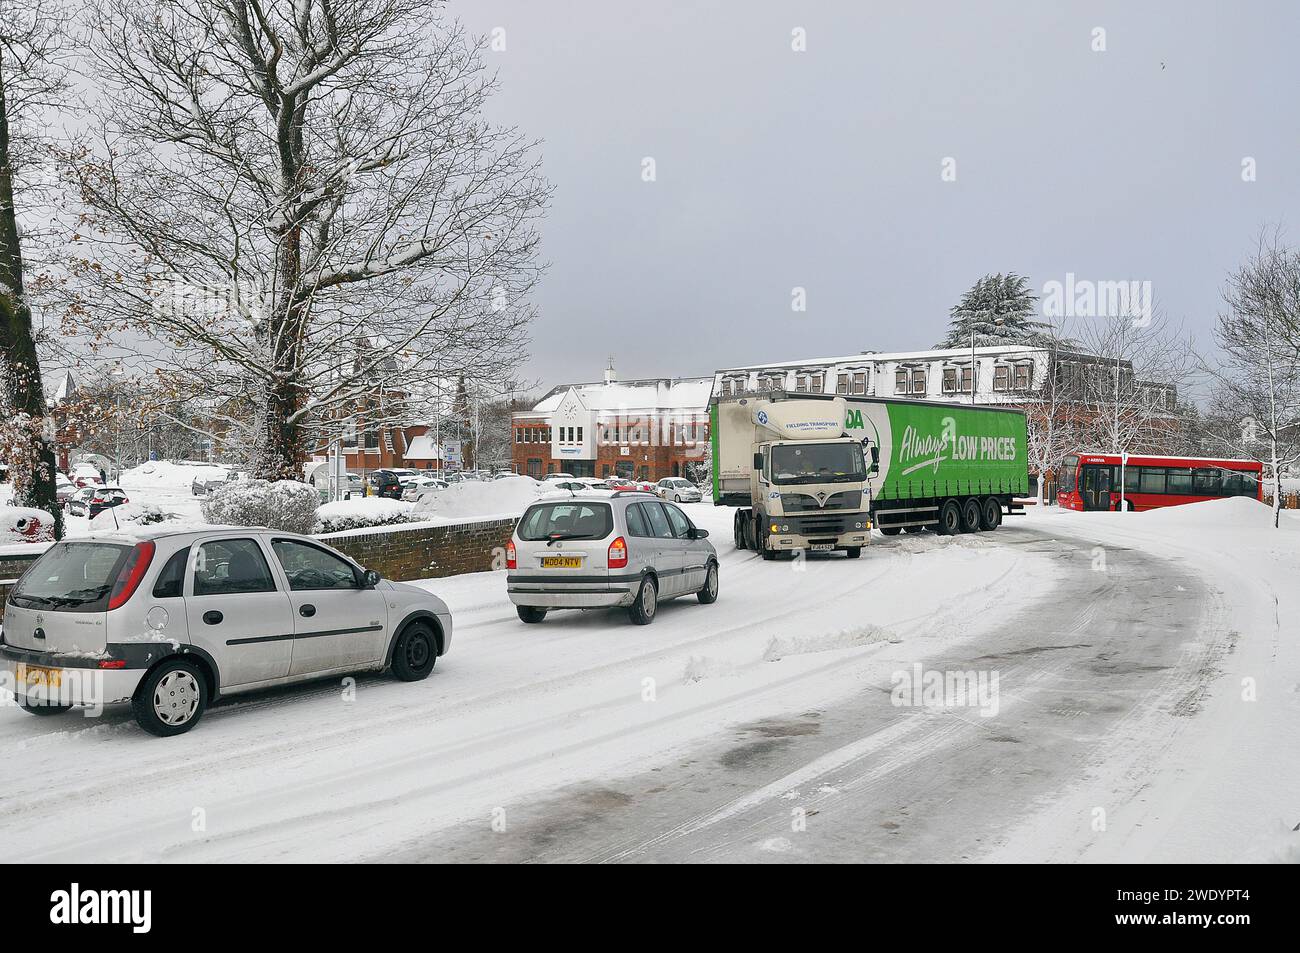 Articulated Asda HGV lorry stuck on snow covered road blocking traffic from multiple directions in Swanley, Kent, UK. Gridlock in town. Travel delays Stock Photo